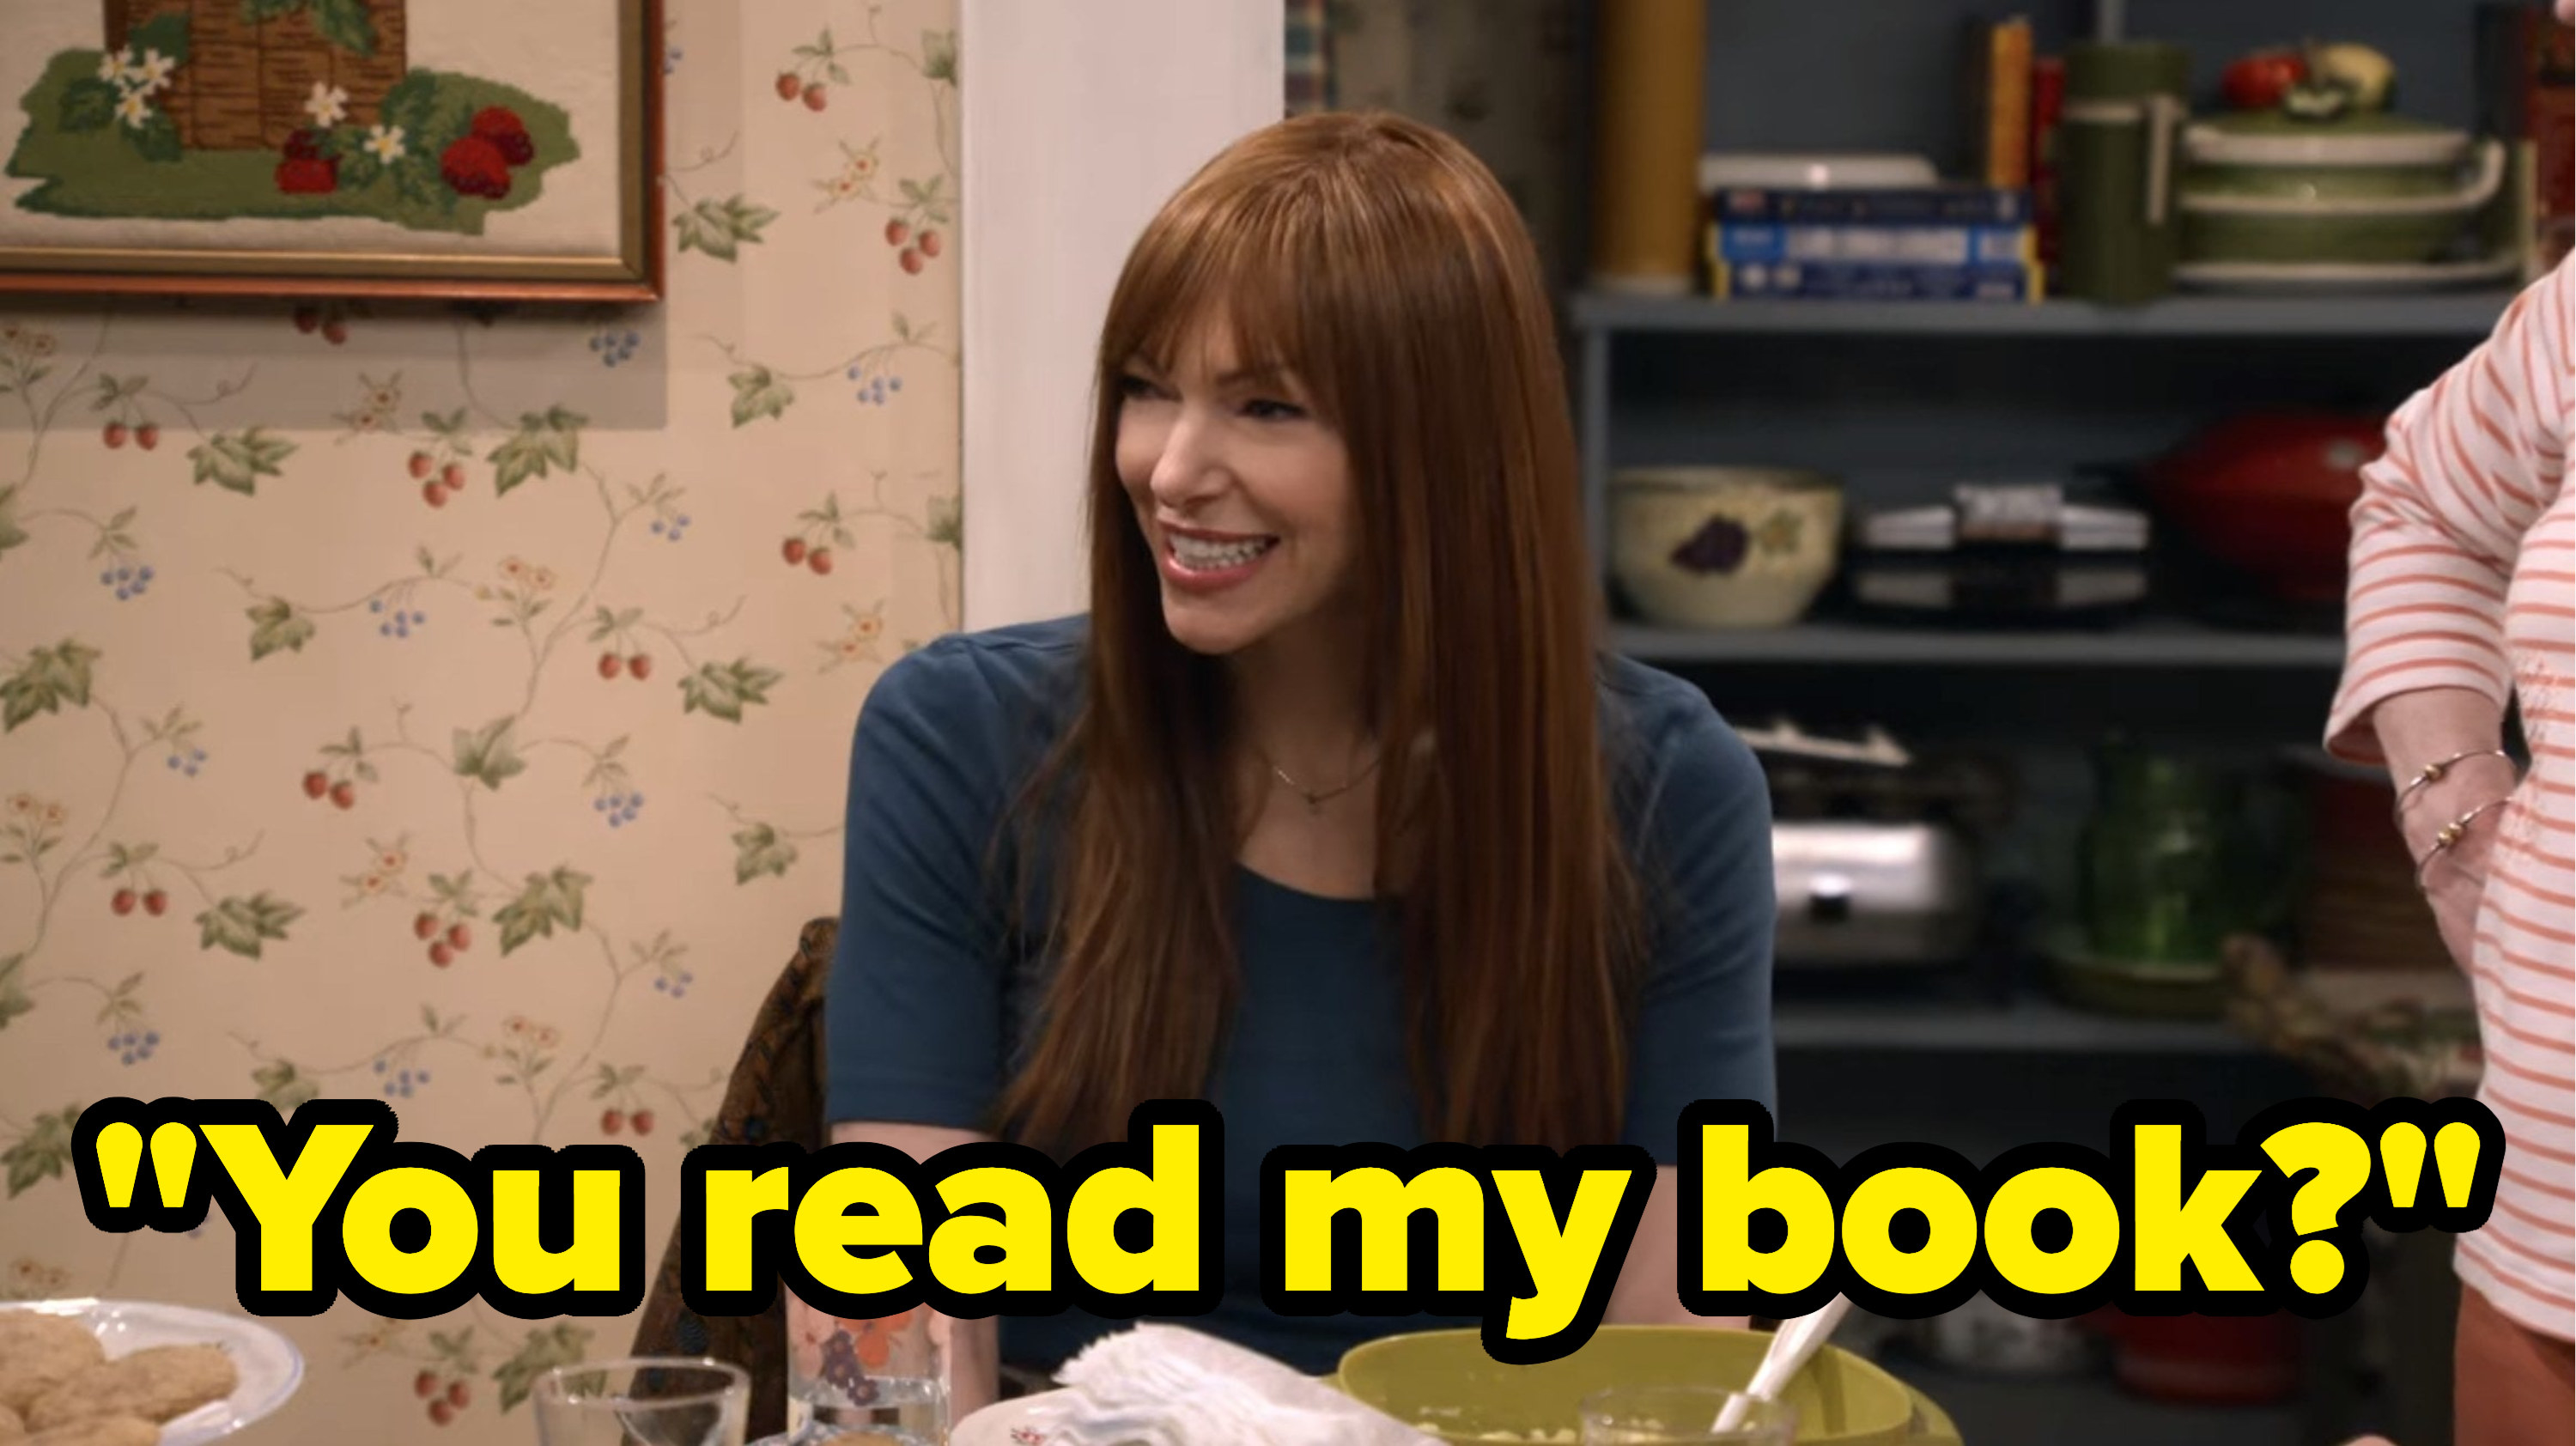 donna saying you read my book on that 90s show